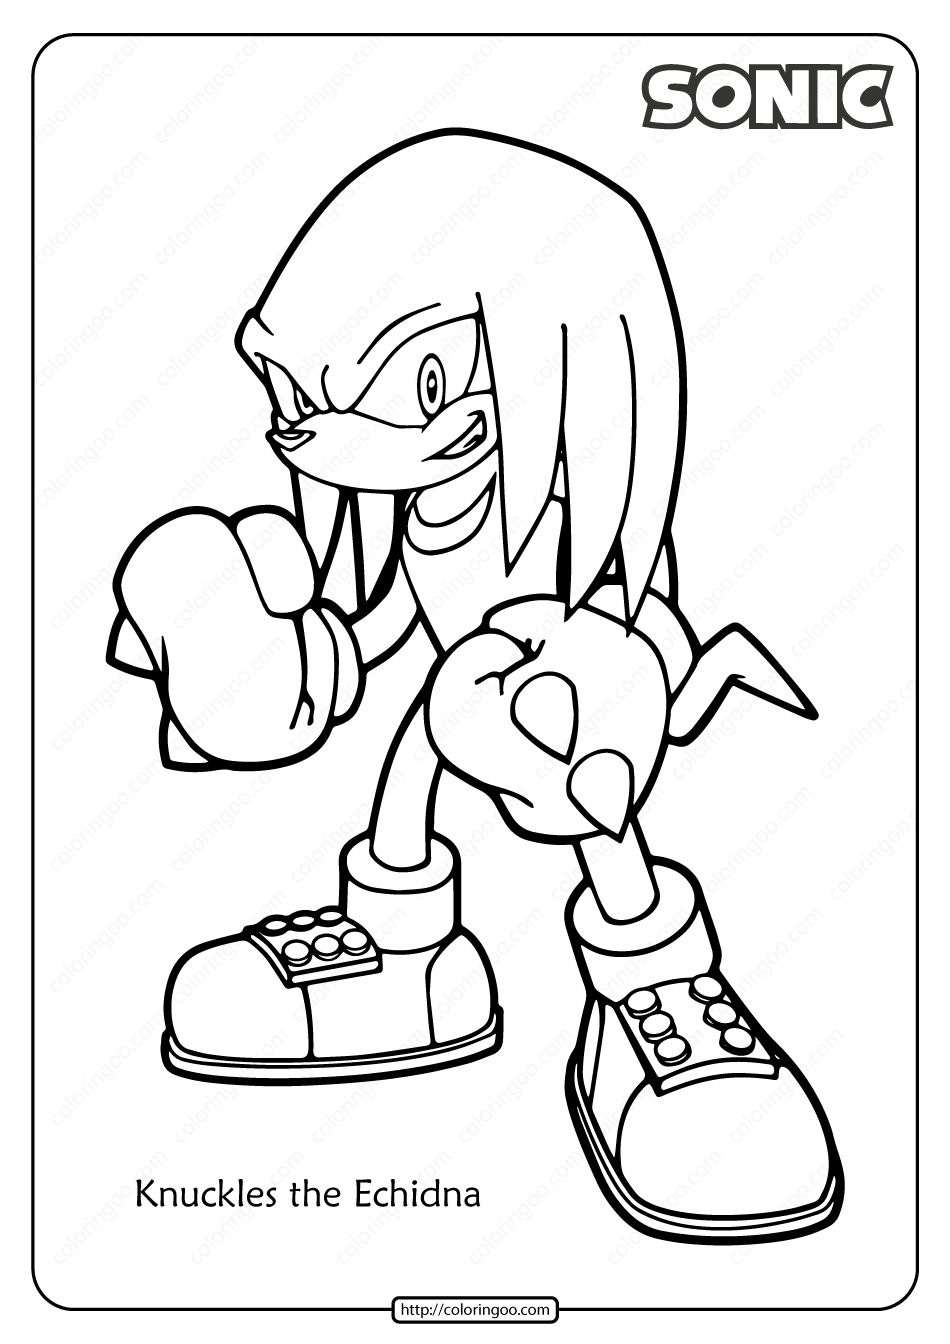 Knuckles the echidna printable coloring pages coloring pages cartoon coloring pages printable coloring pages